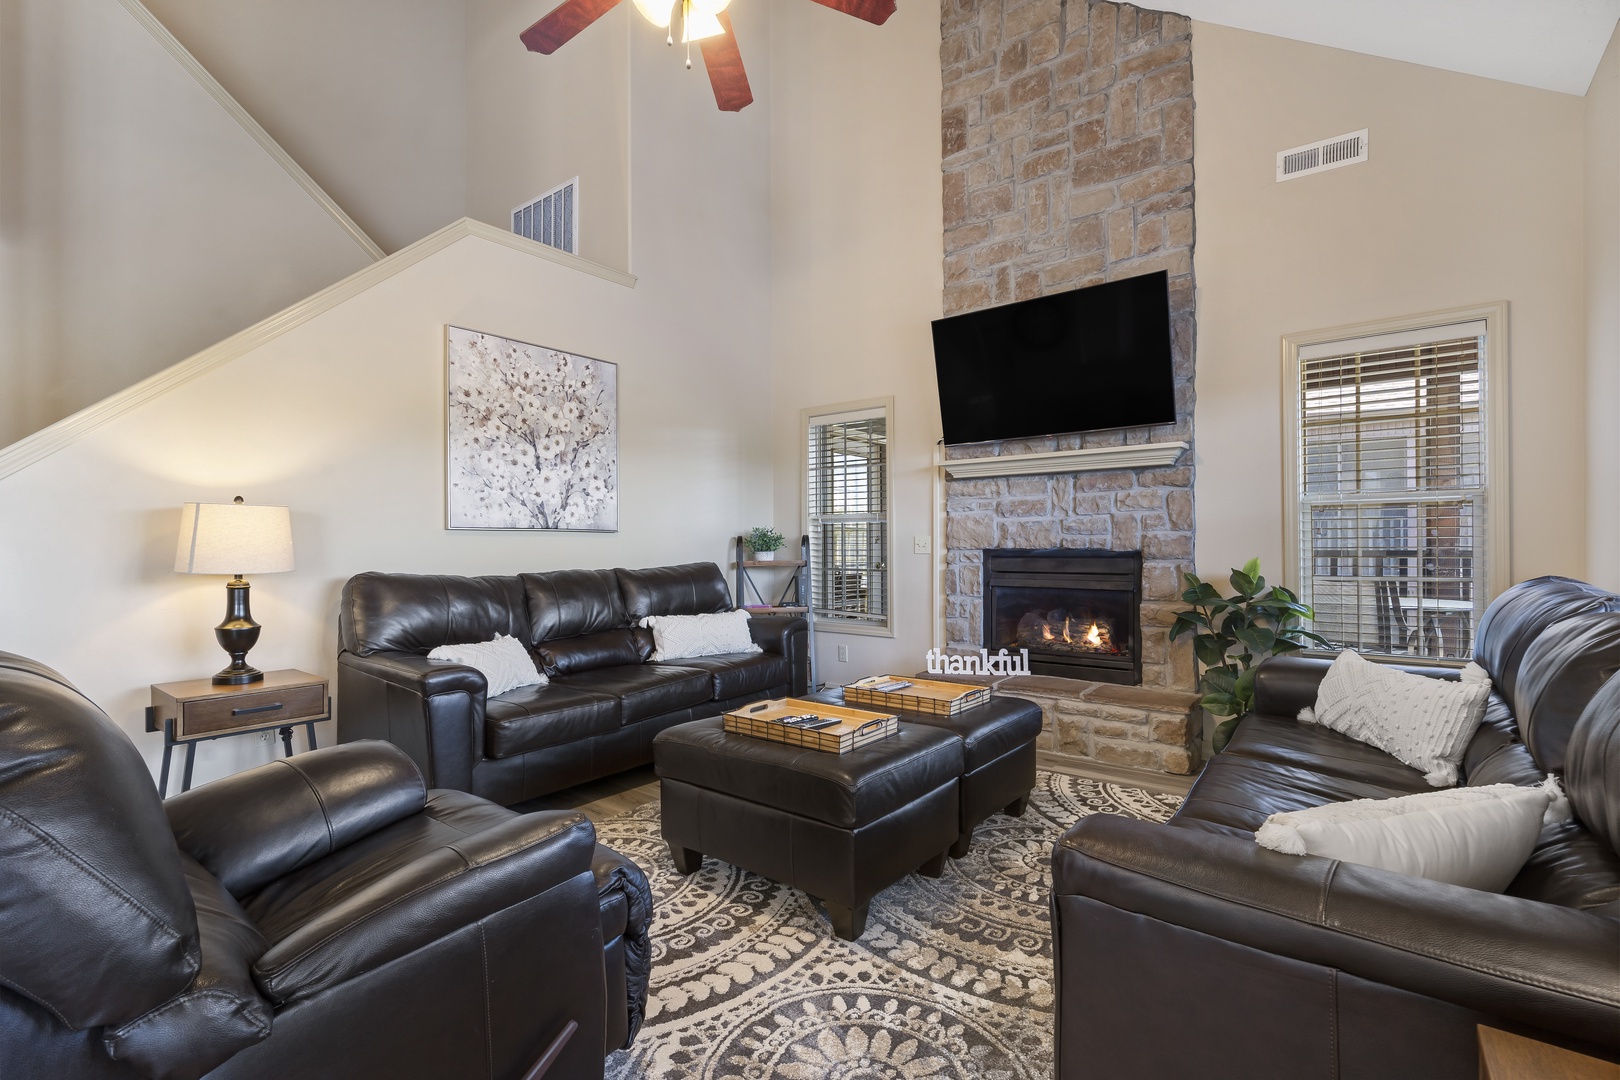 Spacious open living space with TV, fireplace, and deck access